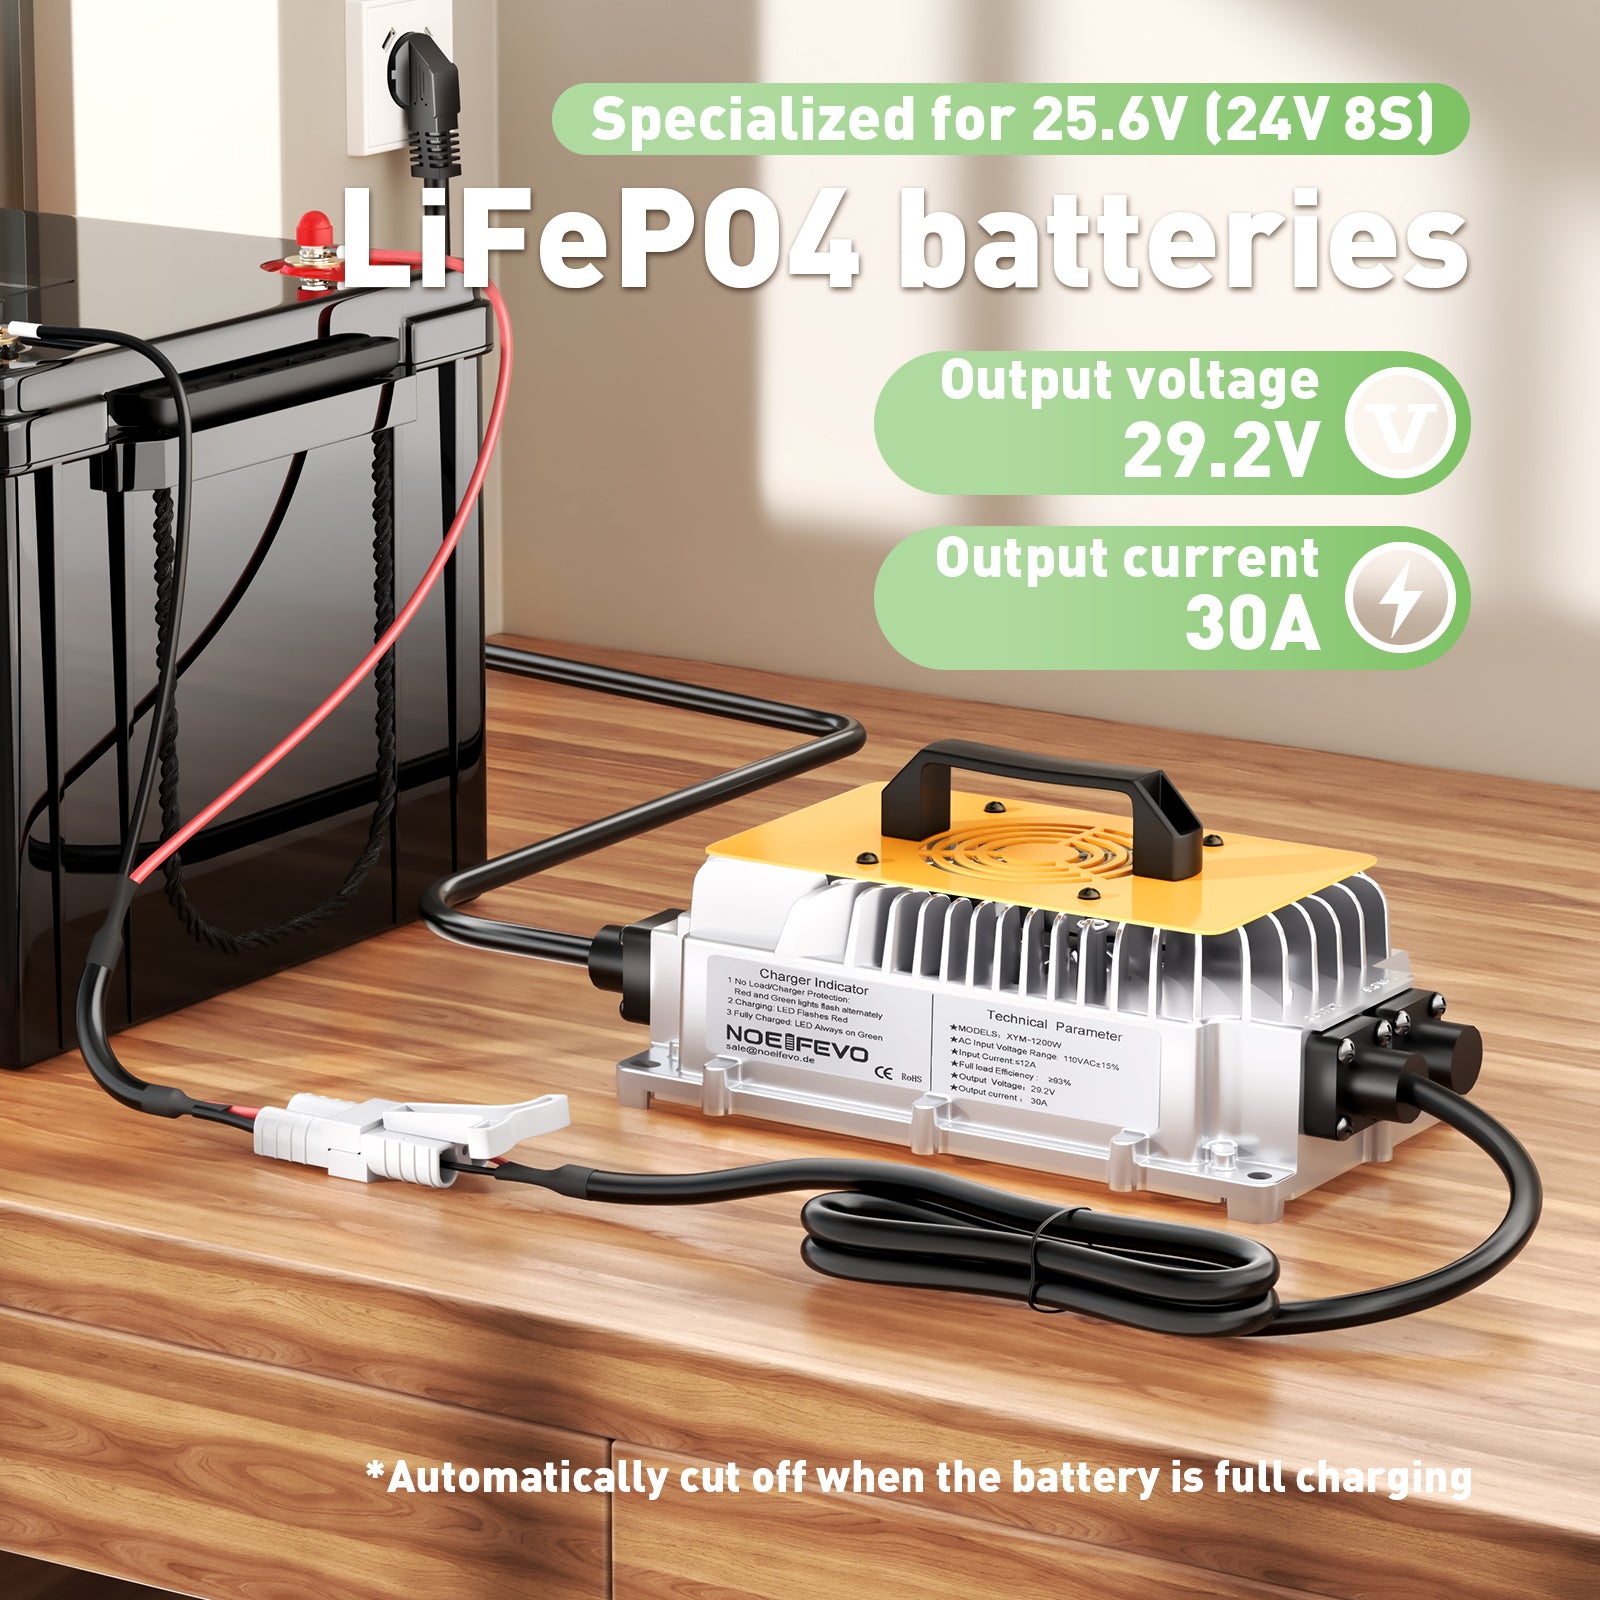 NOEIFEVO 24V LiFePO4 battery charger, 29.2V 30A Waterproof charger for Lithium iron phosphate battery